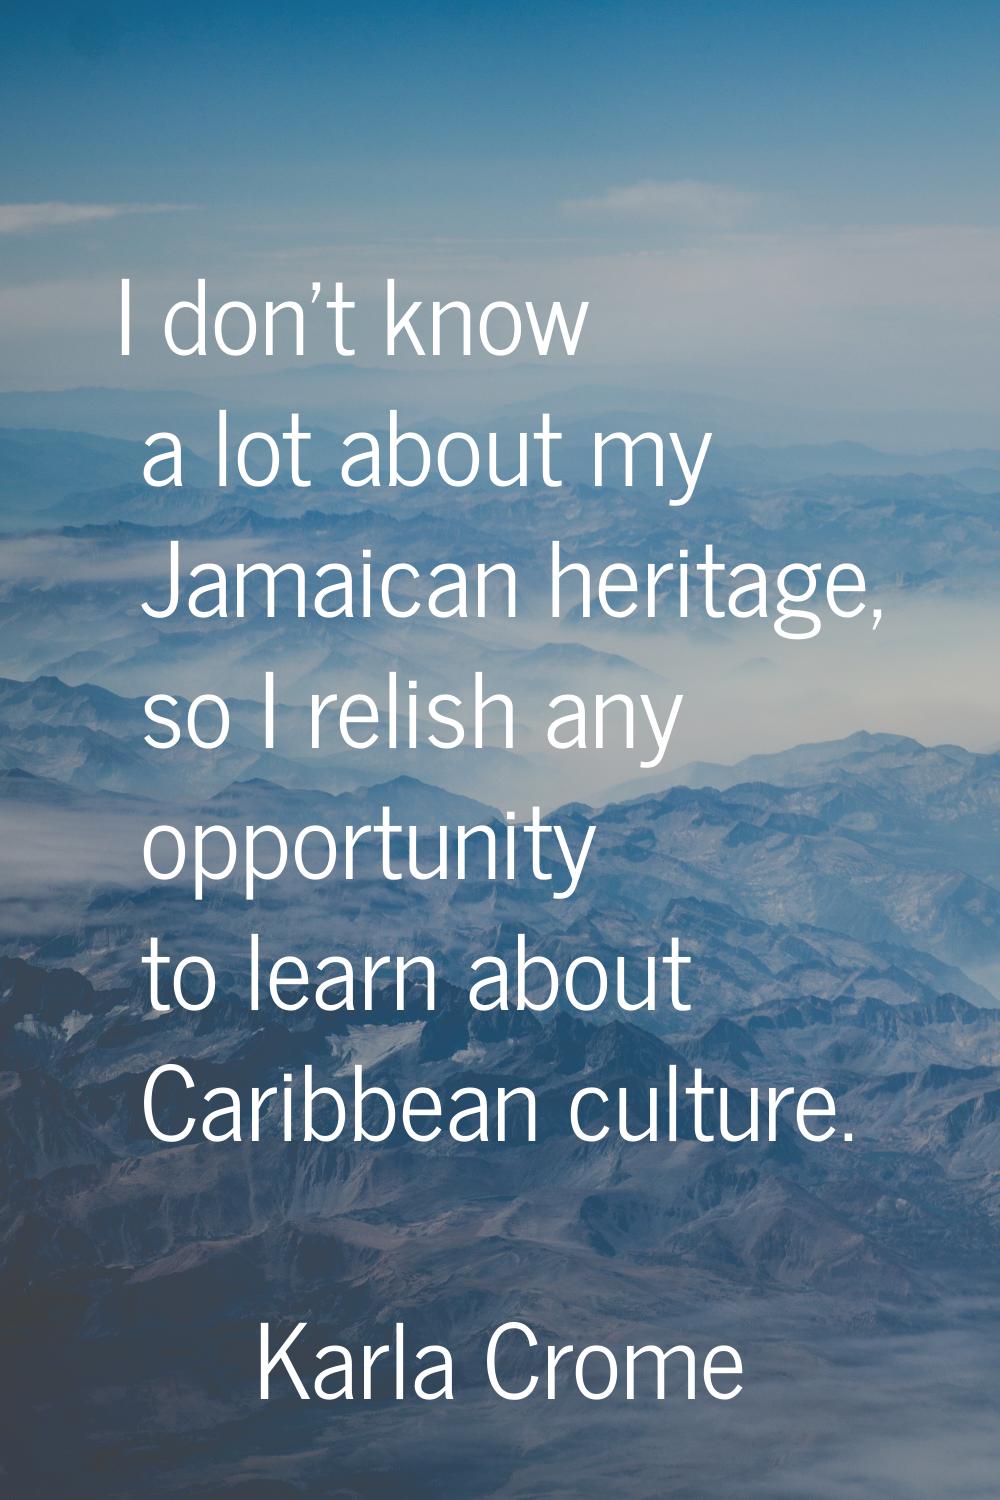 I don't know a lot about my Jamaican heritage, so I relish any opportunity to learn about Caribbean